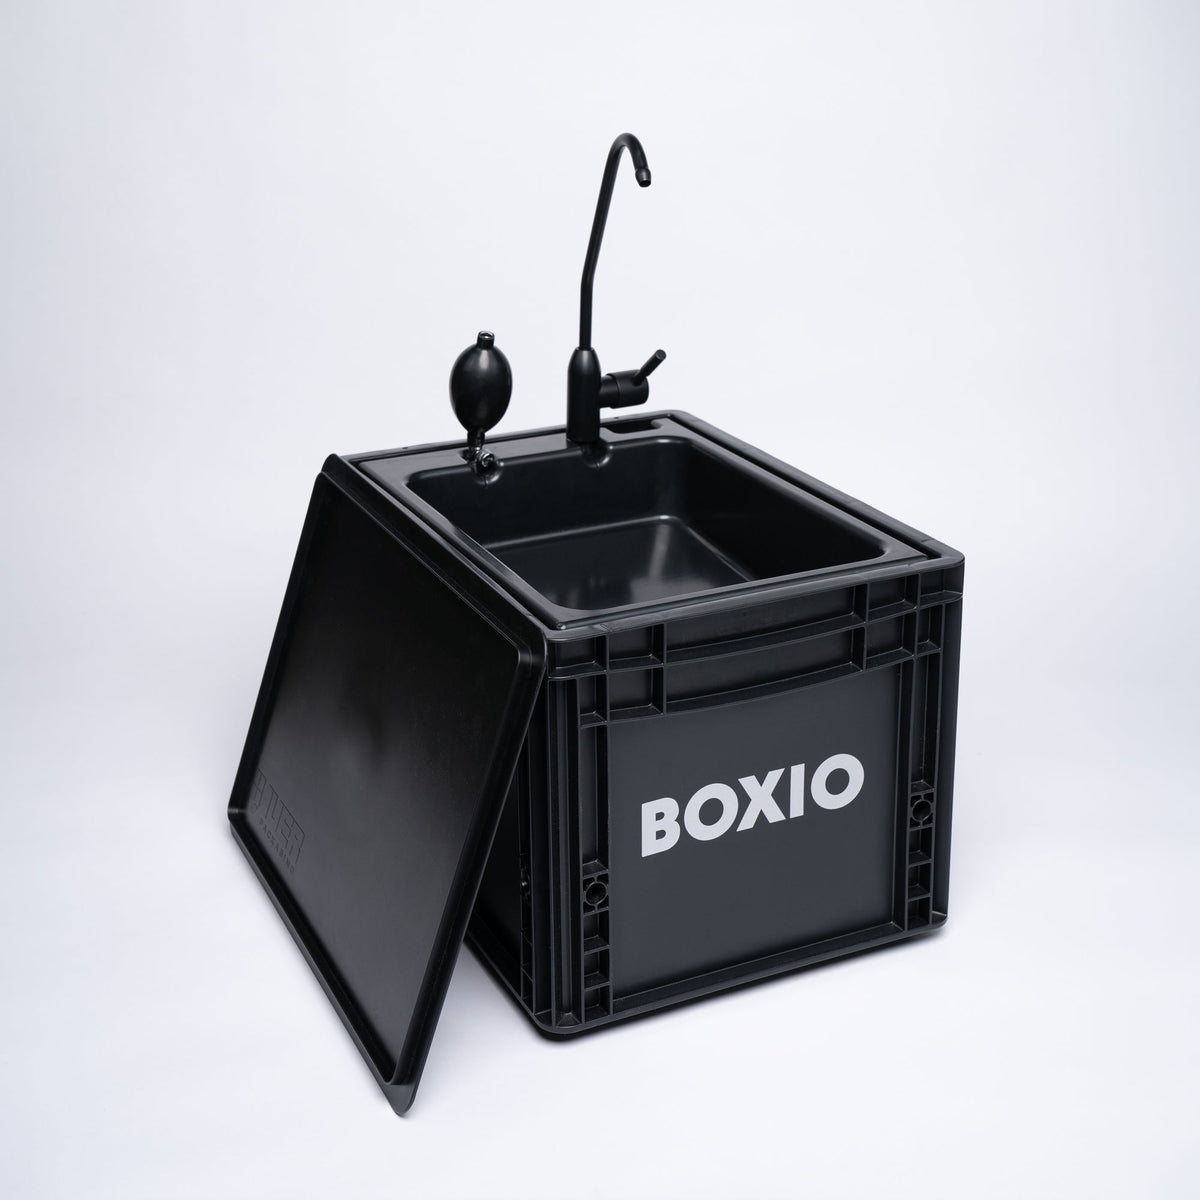 BOXIO SANITARY - Complete set with composting toilet, portable sink an